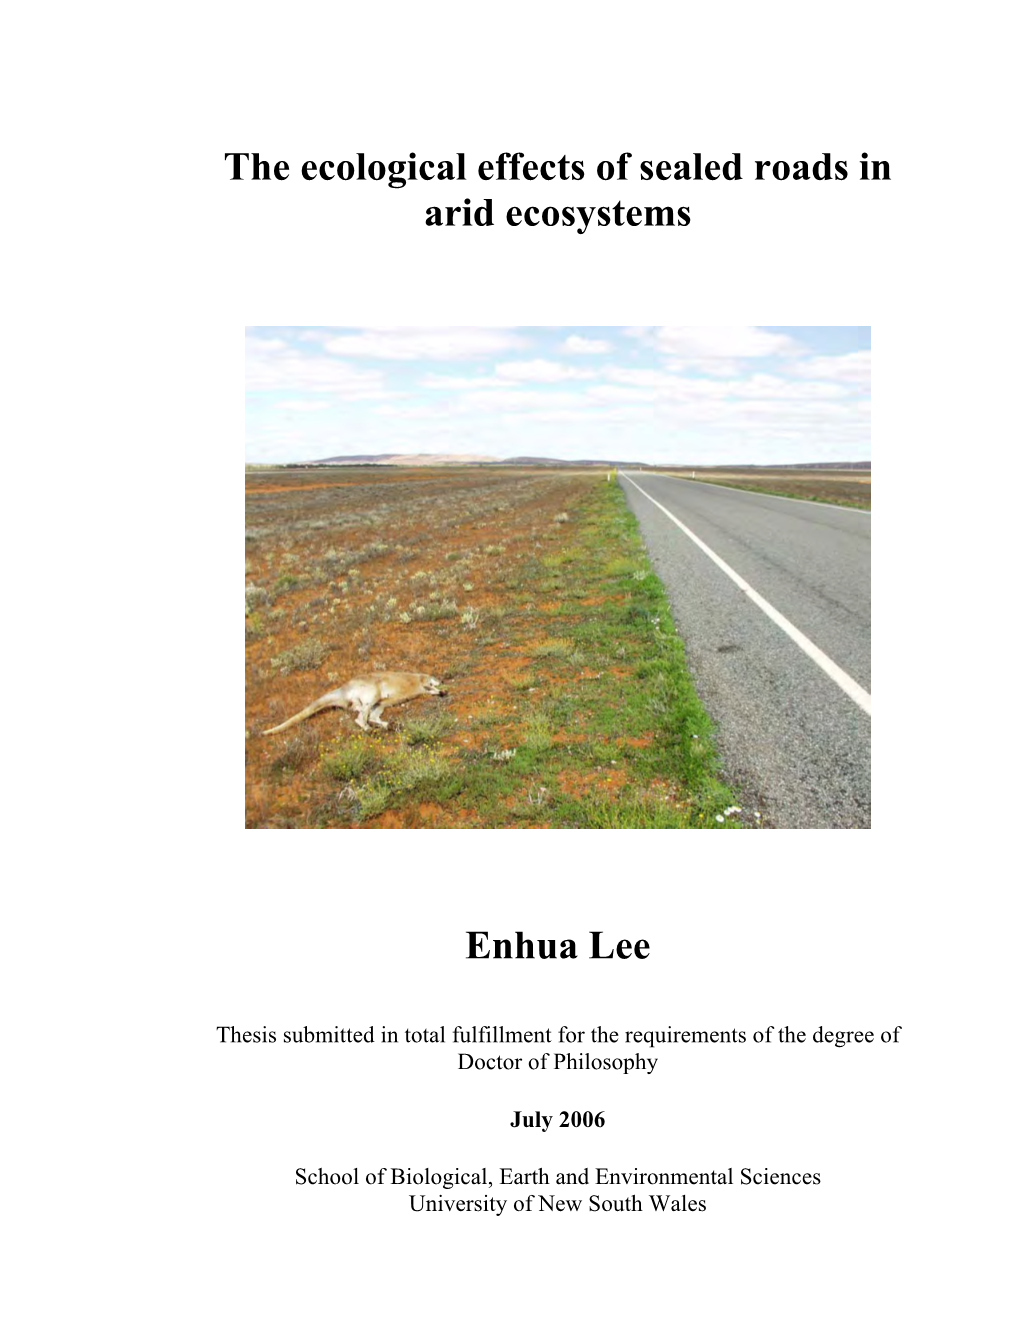 The Ecological Effects of Sealed Roads in Arid Ecosystems Enhua